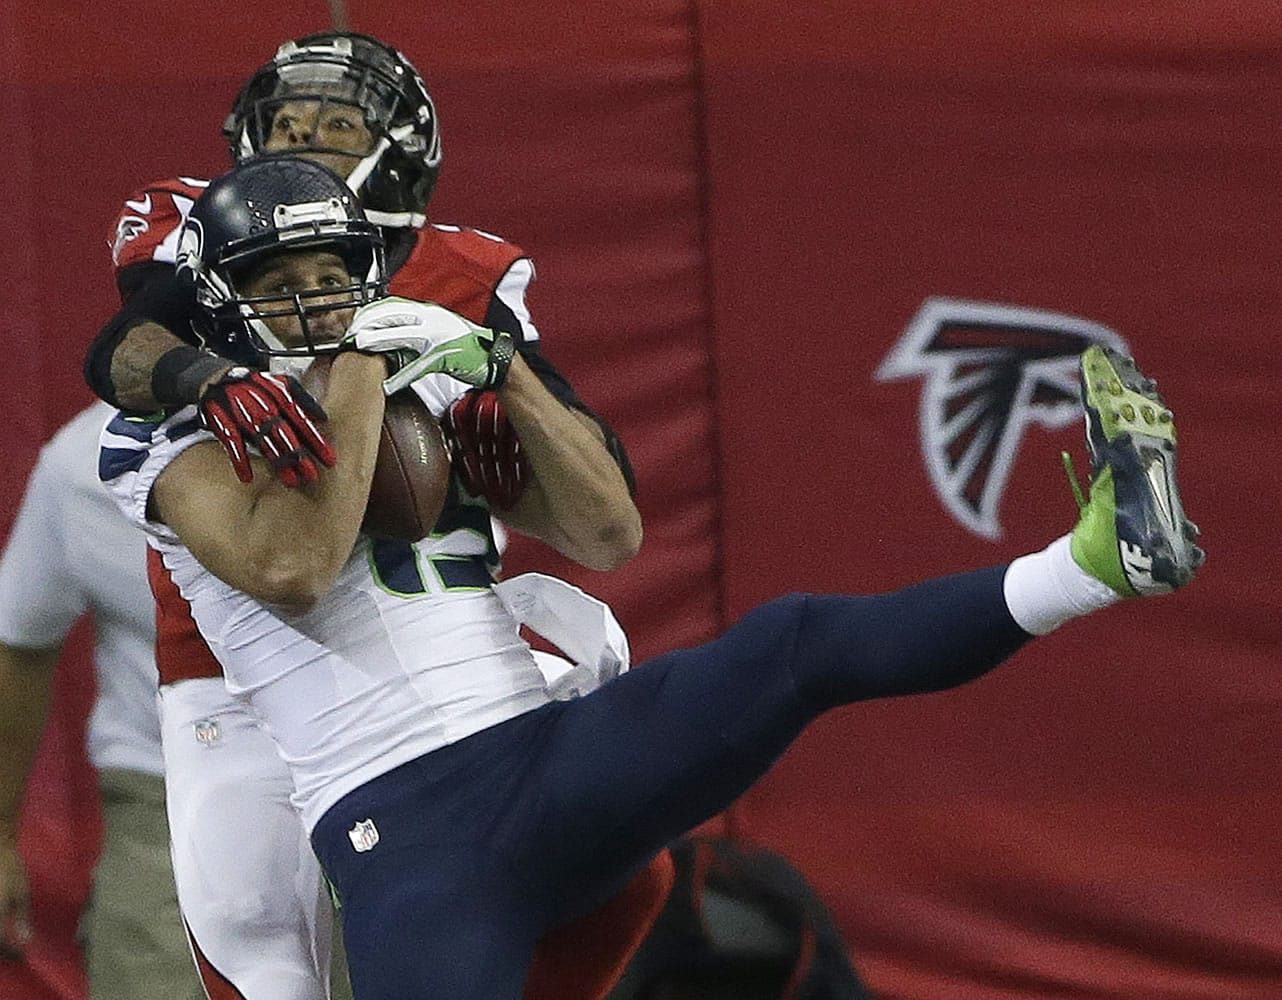 Seattle Seahawks wide receiver Jermaine Kearse (15) makes a touchdown catch against Atlanta Falcons free safety Thomas DeCoud (28) during the second quarter Sunday in Atlanta.